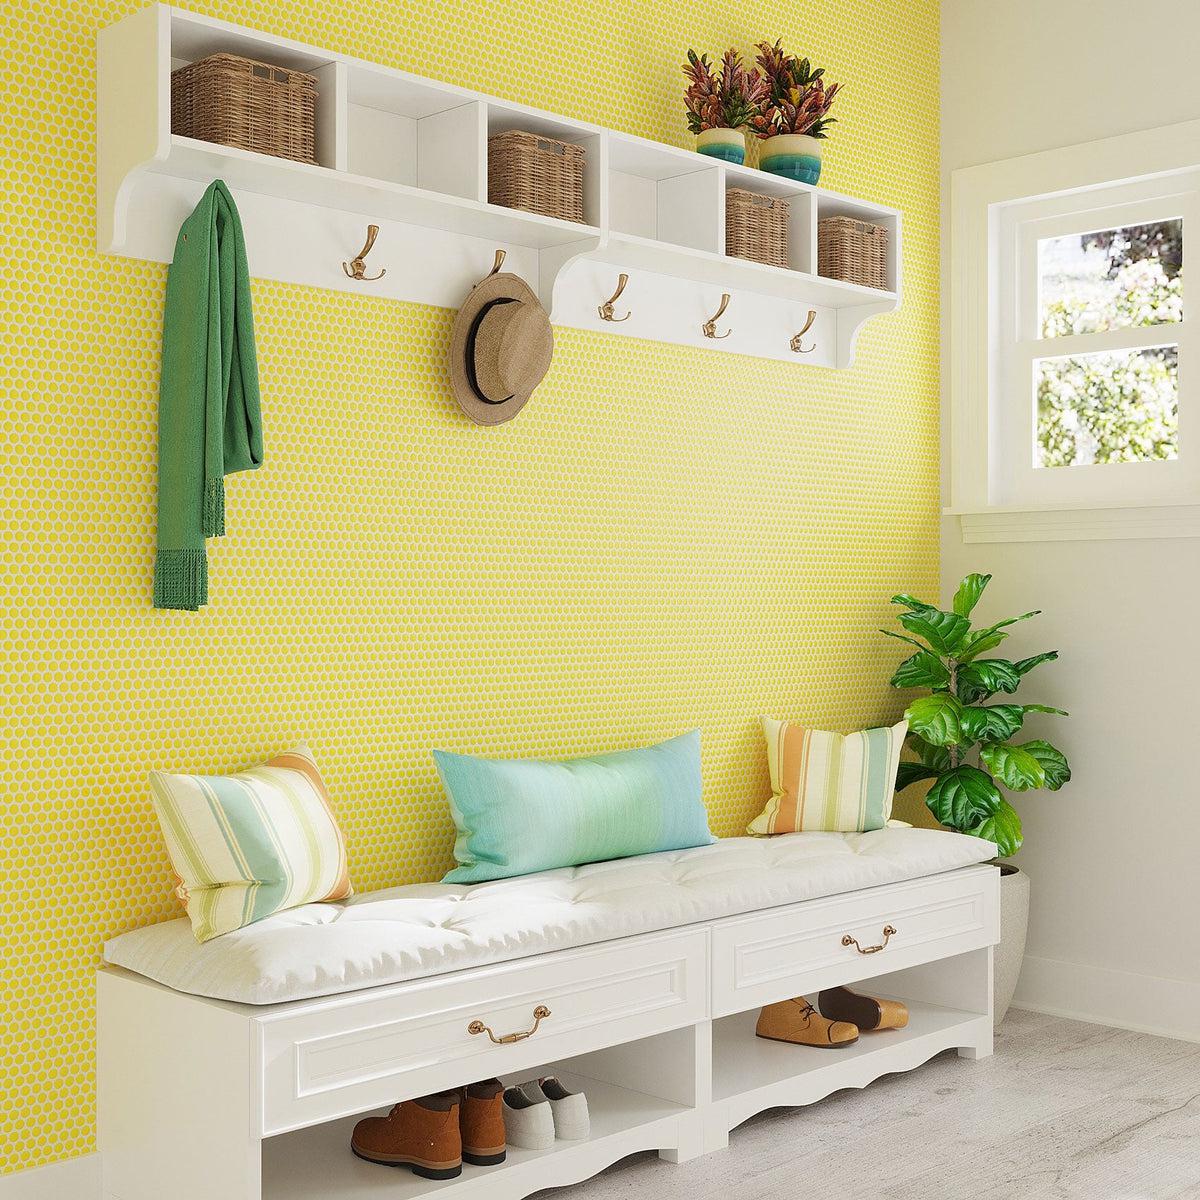 Yellow penny tile wall entryway